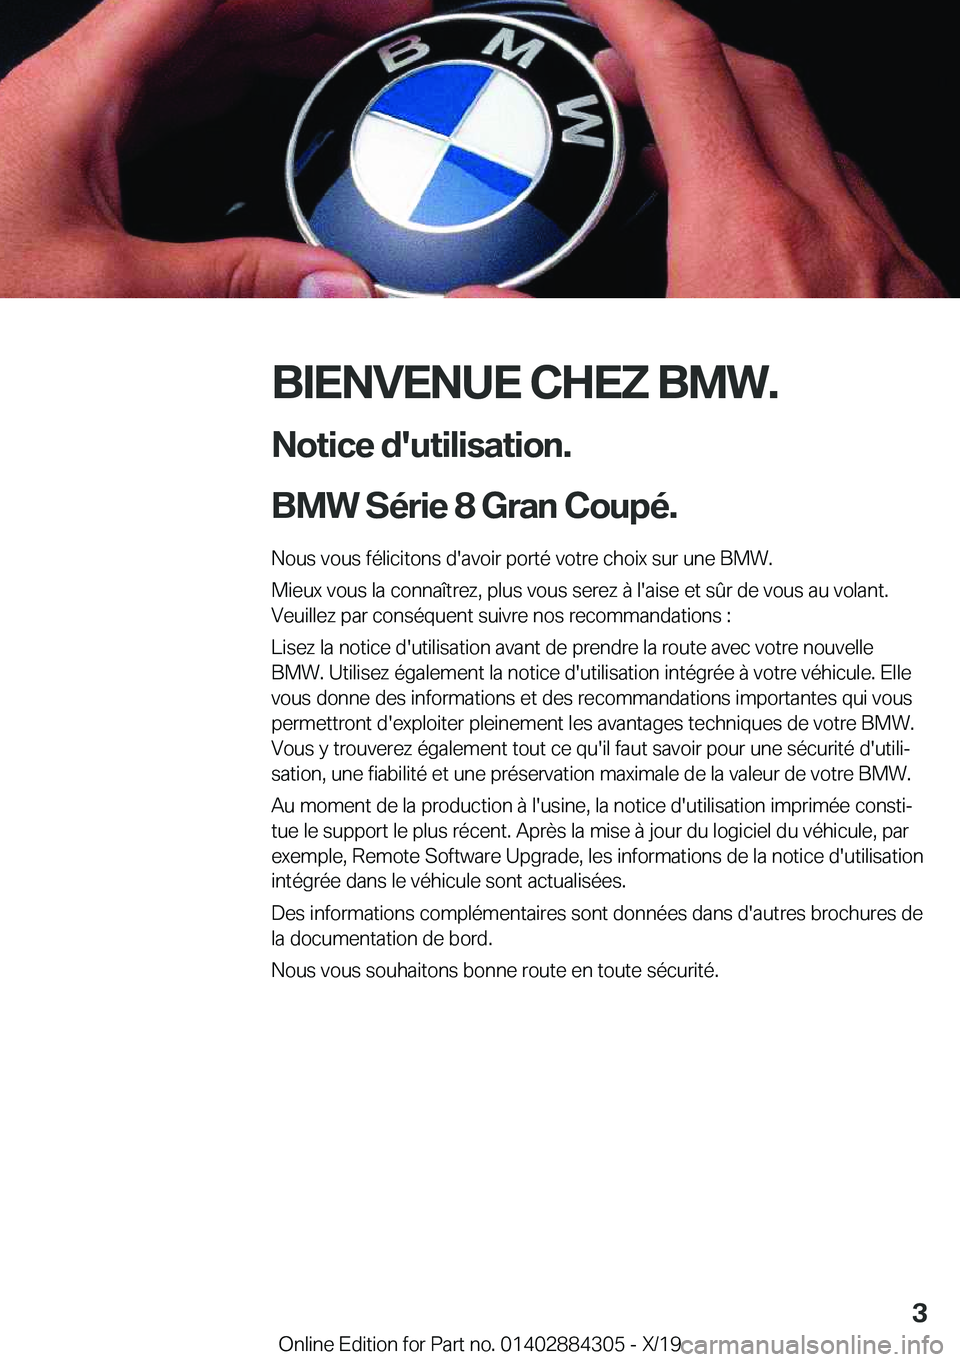 BMW 8 SERIES GRAN COUPE 2020  Notices Demploi (in French) �B�I�E�N�V�E�N�U�E��C�H�E�Z��B�M�W�.�N�o�t�i�c�e��d�'�u�t�i�l�i�s�a�t�i�o�n�.
�B�M�W��S�é�r�i�e��8��G�r�a�n��C�o�u�p�é�.
�N�o�u�s��v�o�u�s��f�é�l�i�c�i�t�o�n�s��d�'�a�v�o�i�r��p�